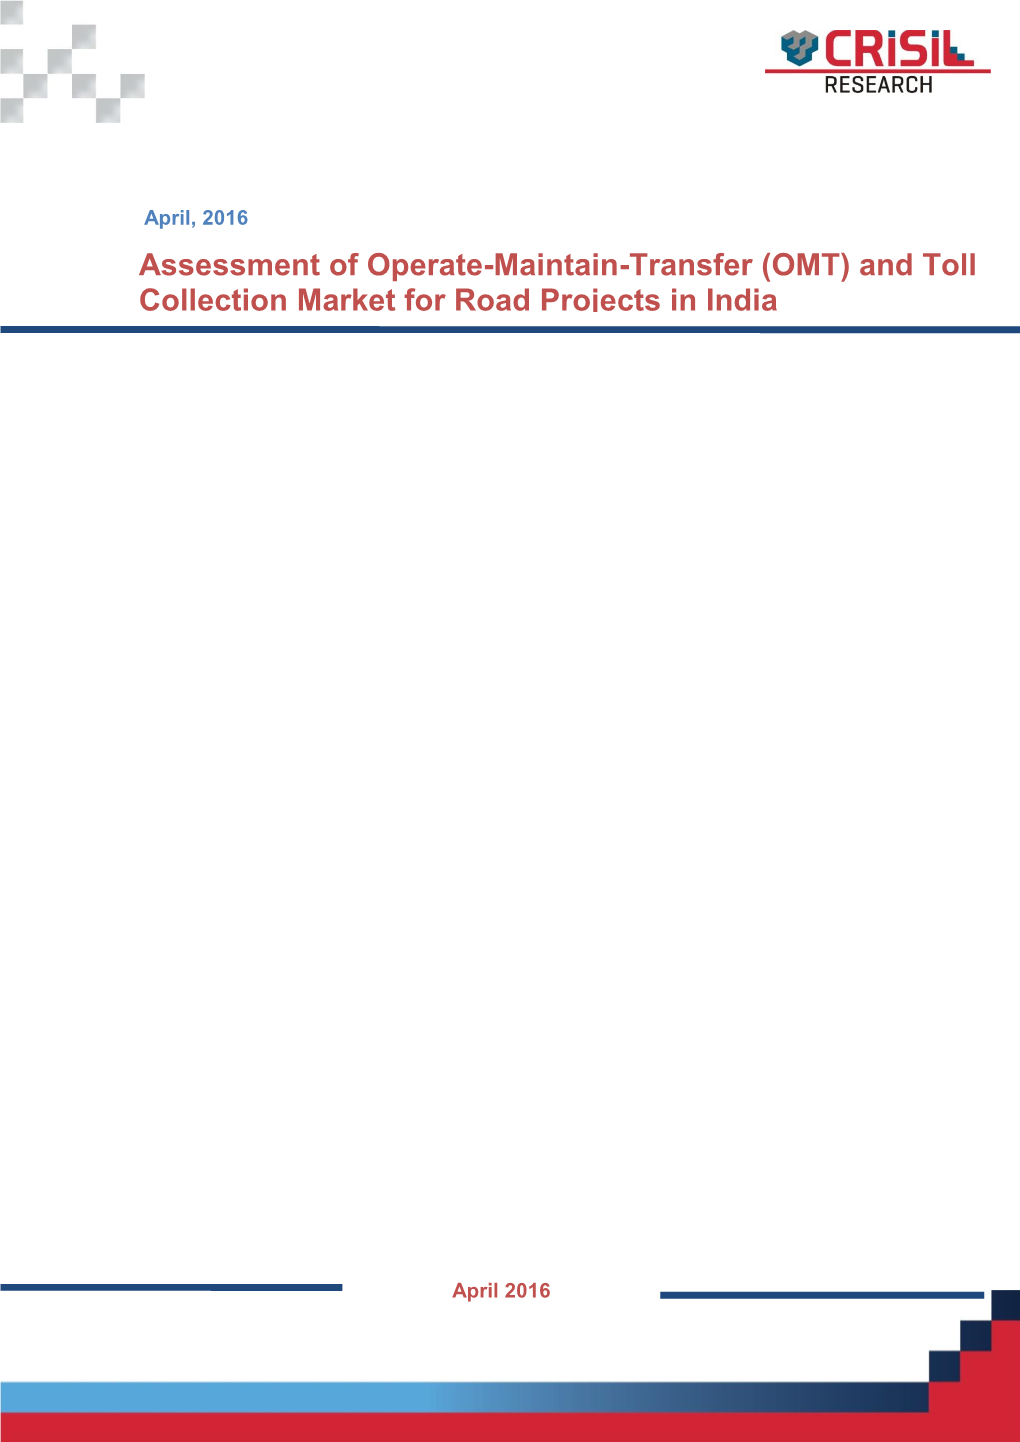 OMT) and Toll Collection Market for Road Projects in India